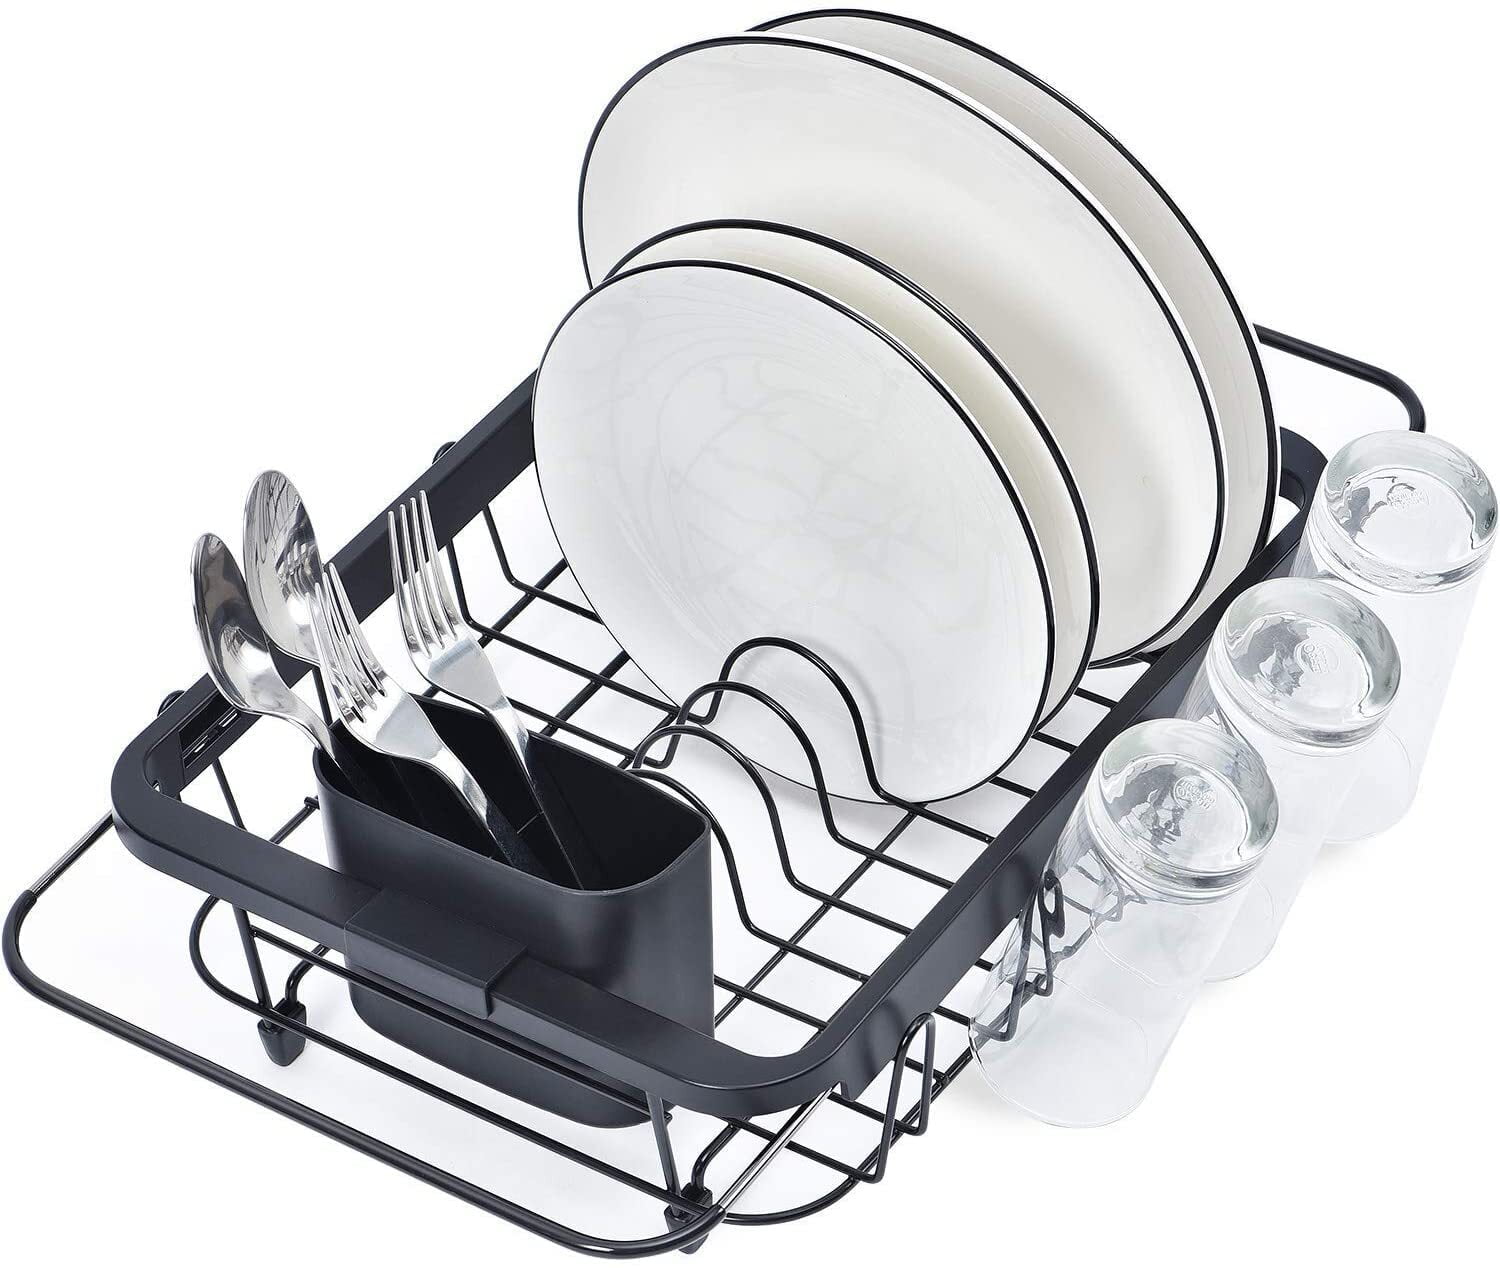 ADBIU Large Dish Drying Rack with Drainboard Set（12.8 - 20） Expandable  Compact Dish Drainer (Gray, Large)